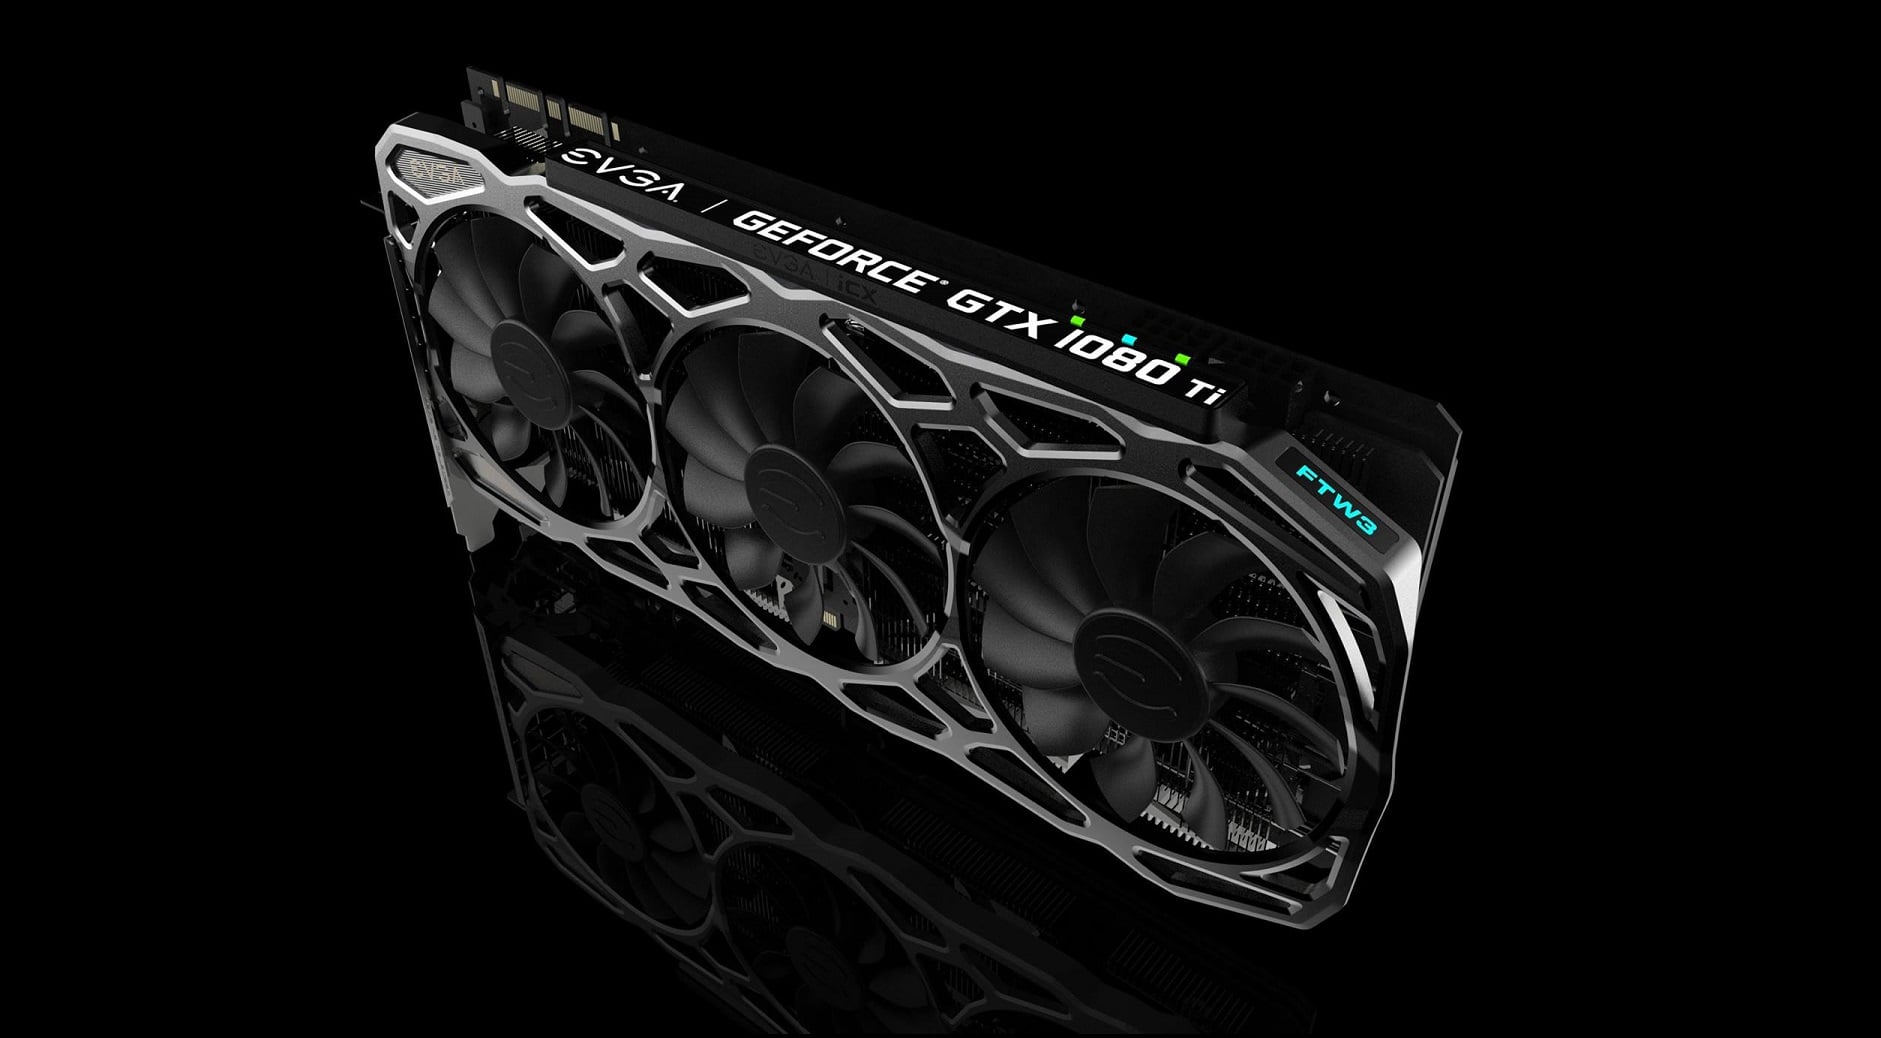 The Best Graphics Cards of 2019